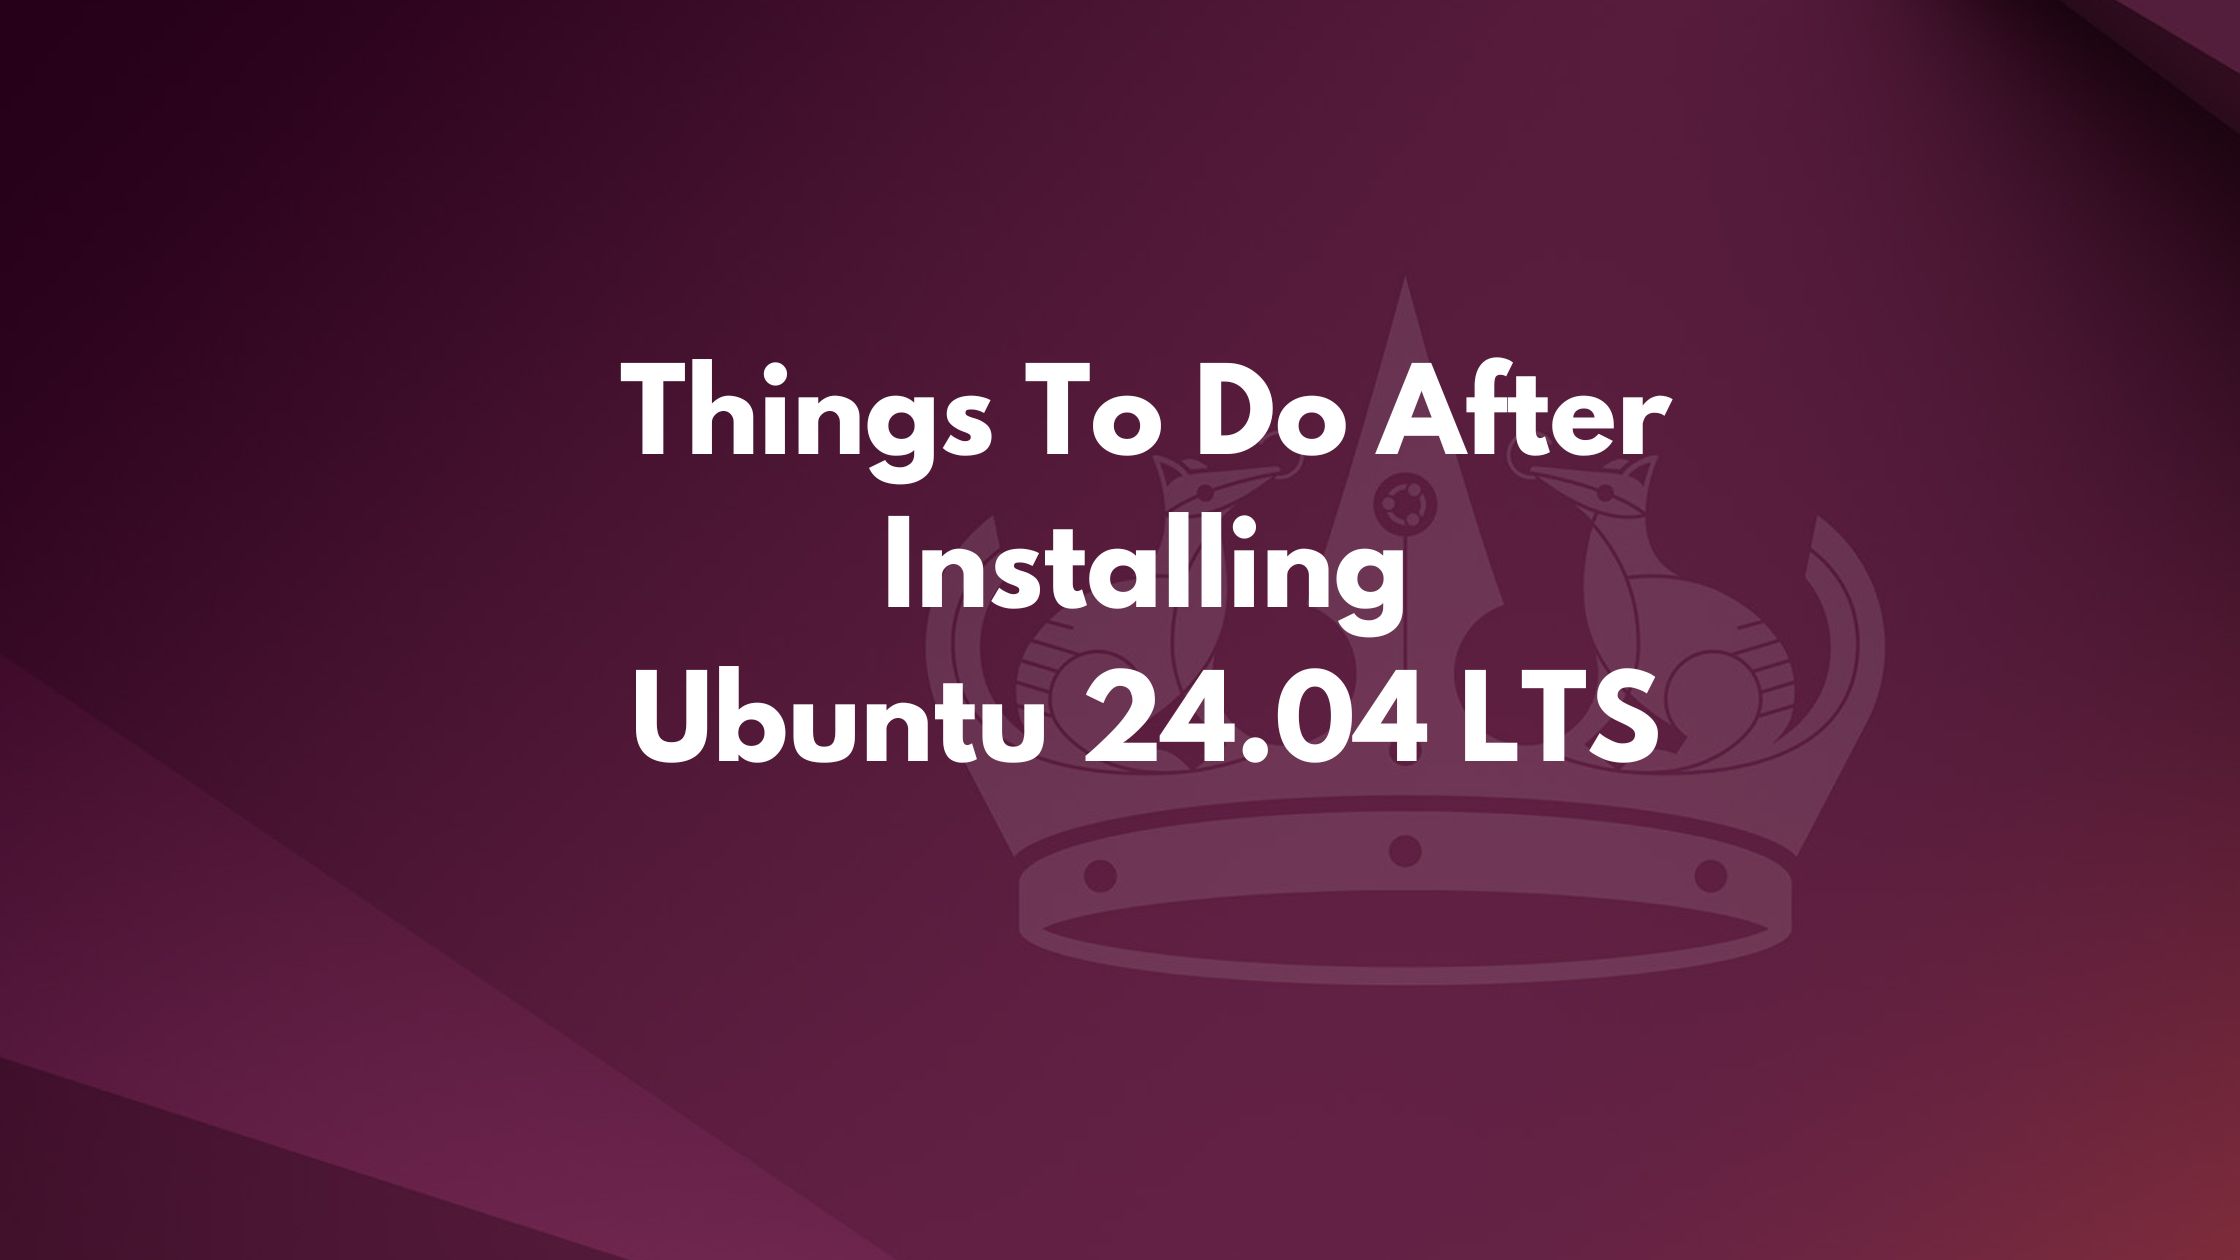 20 Things To Do After Installing Ubuntu 24.04 LTS